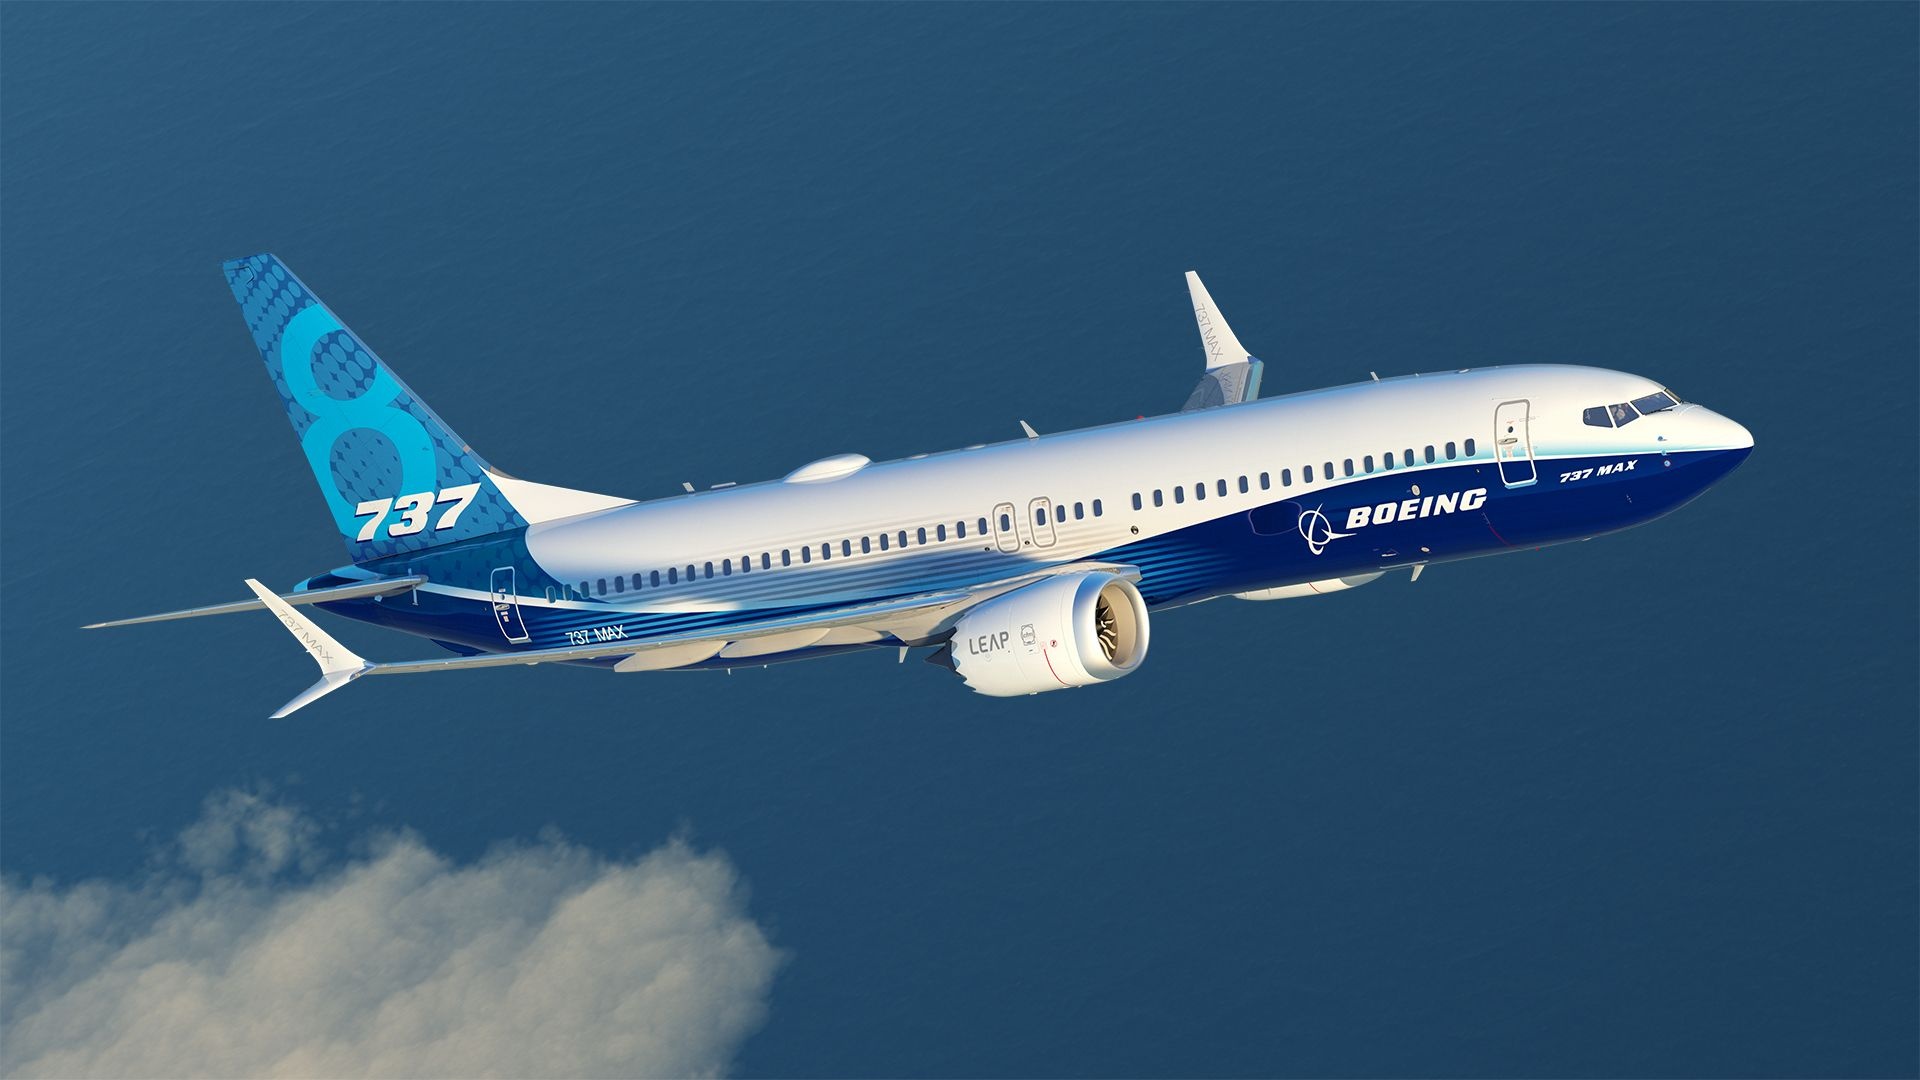 Boeing 737 Max Wallpapers - Top Free Boeing 737 Max Backgrounds 1920x1080